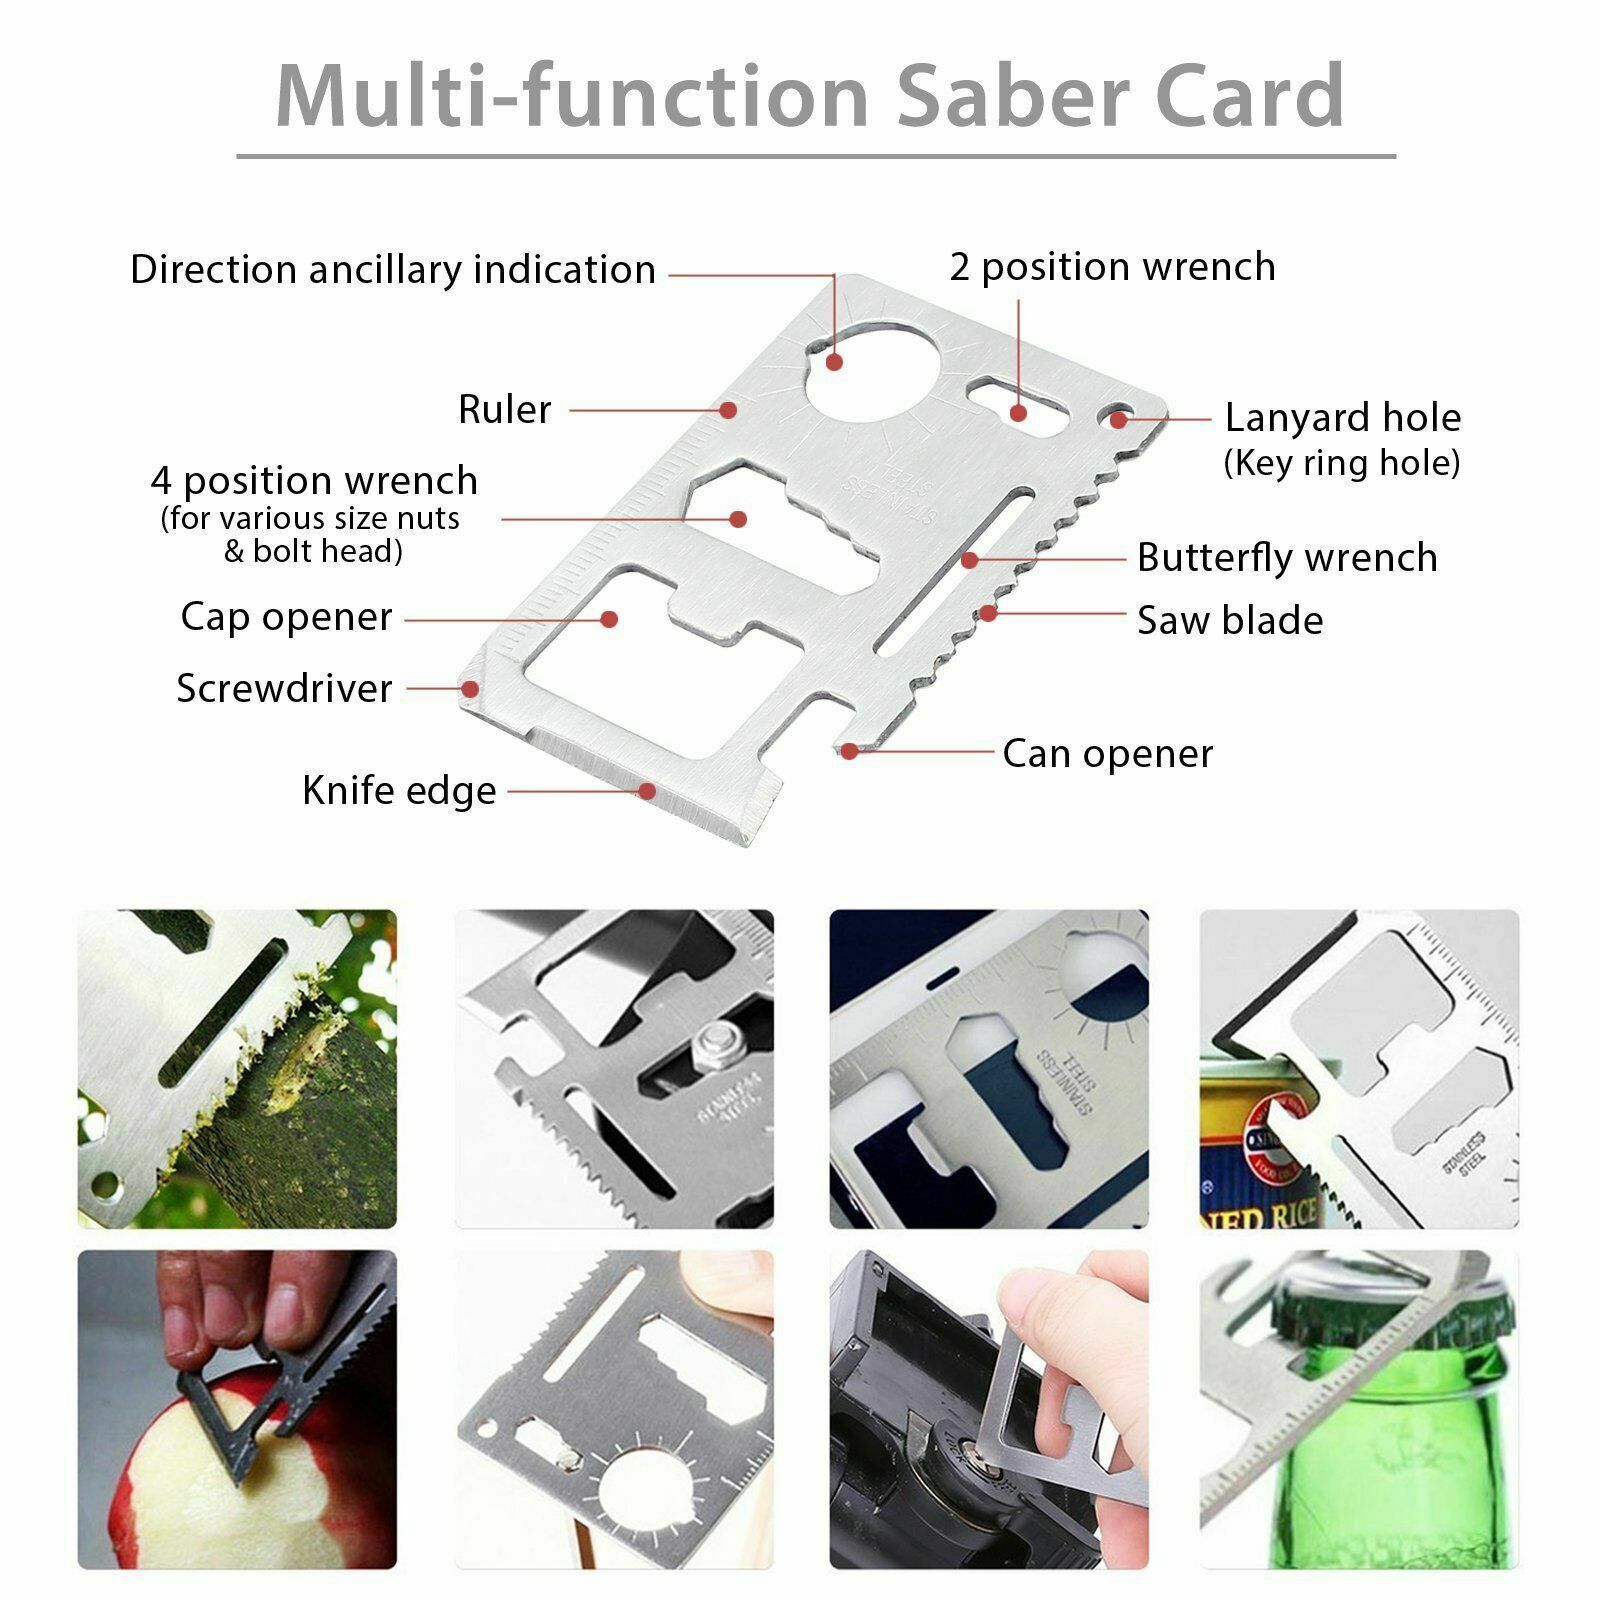 Multiple images of the multi function Saber Card and its uses. Text says "Multi function Saber Card"